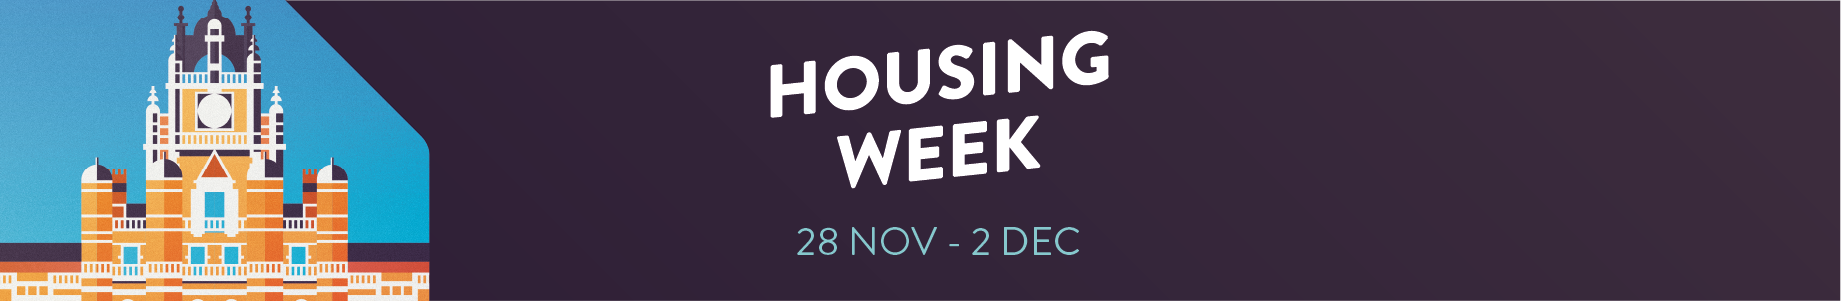 Image of Founder's Building, text reads Housing Week, 28 Nov-2 Dec